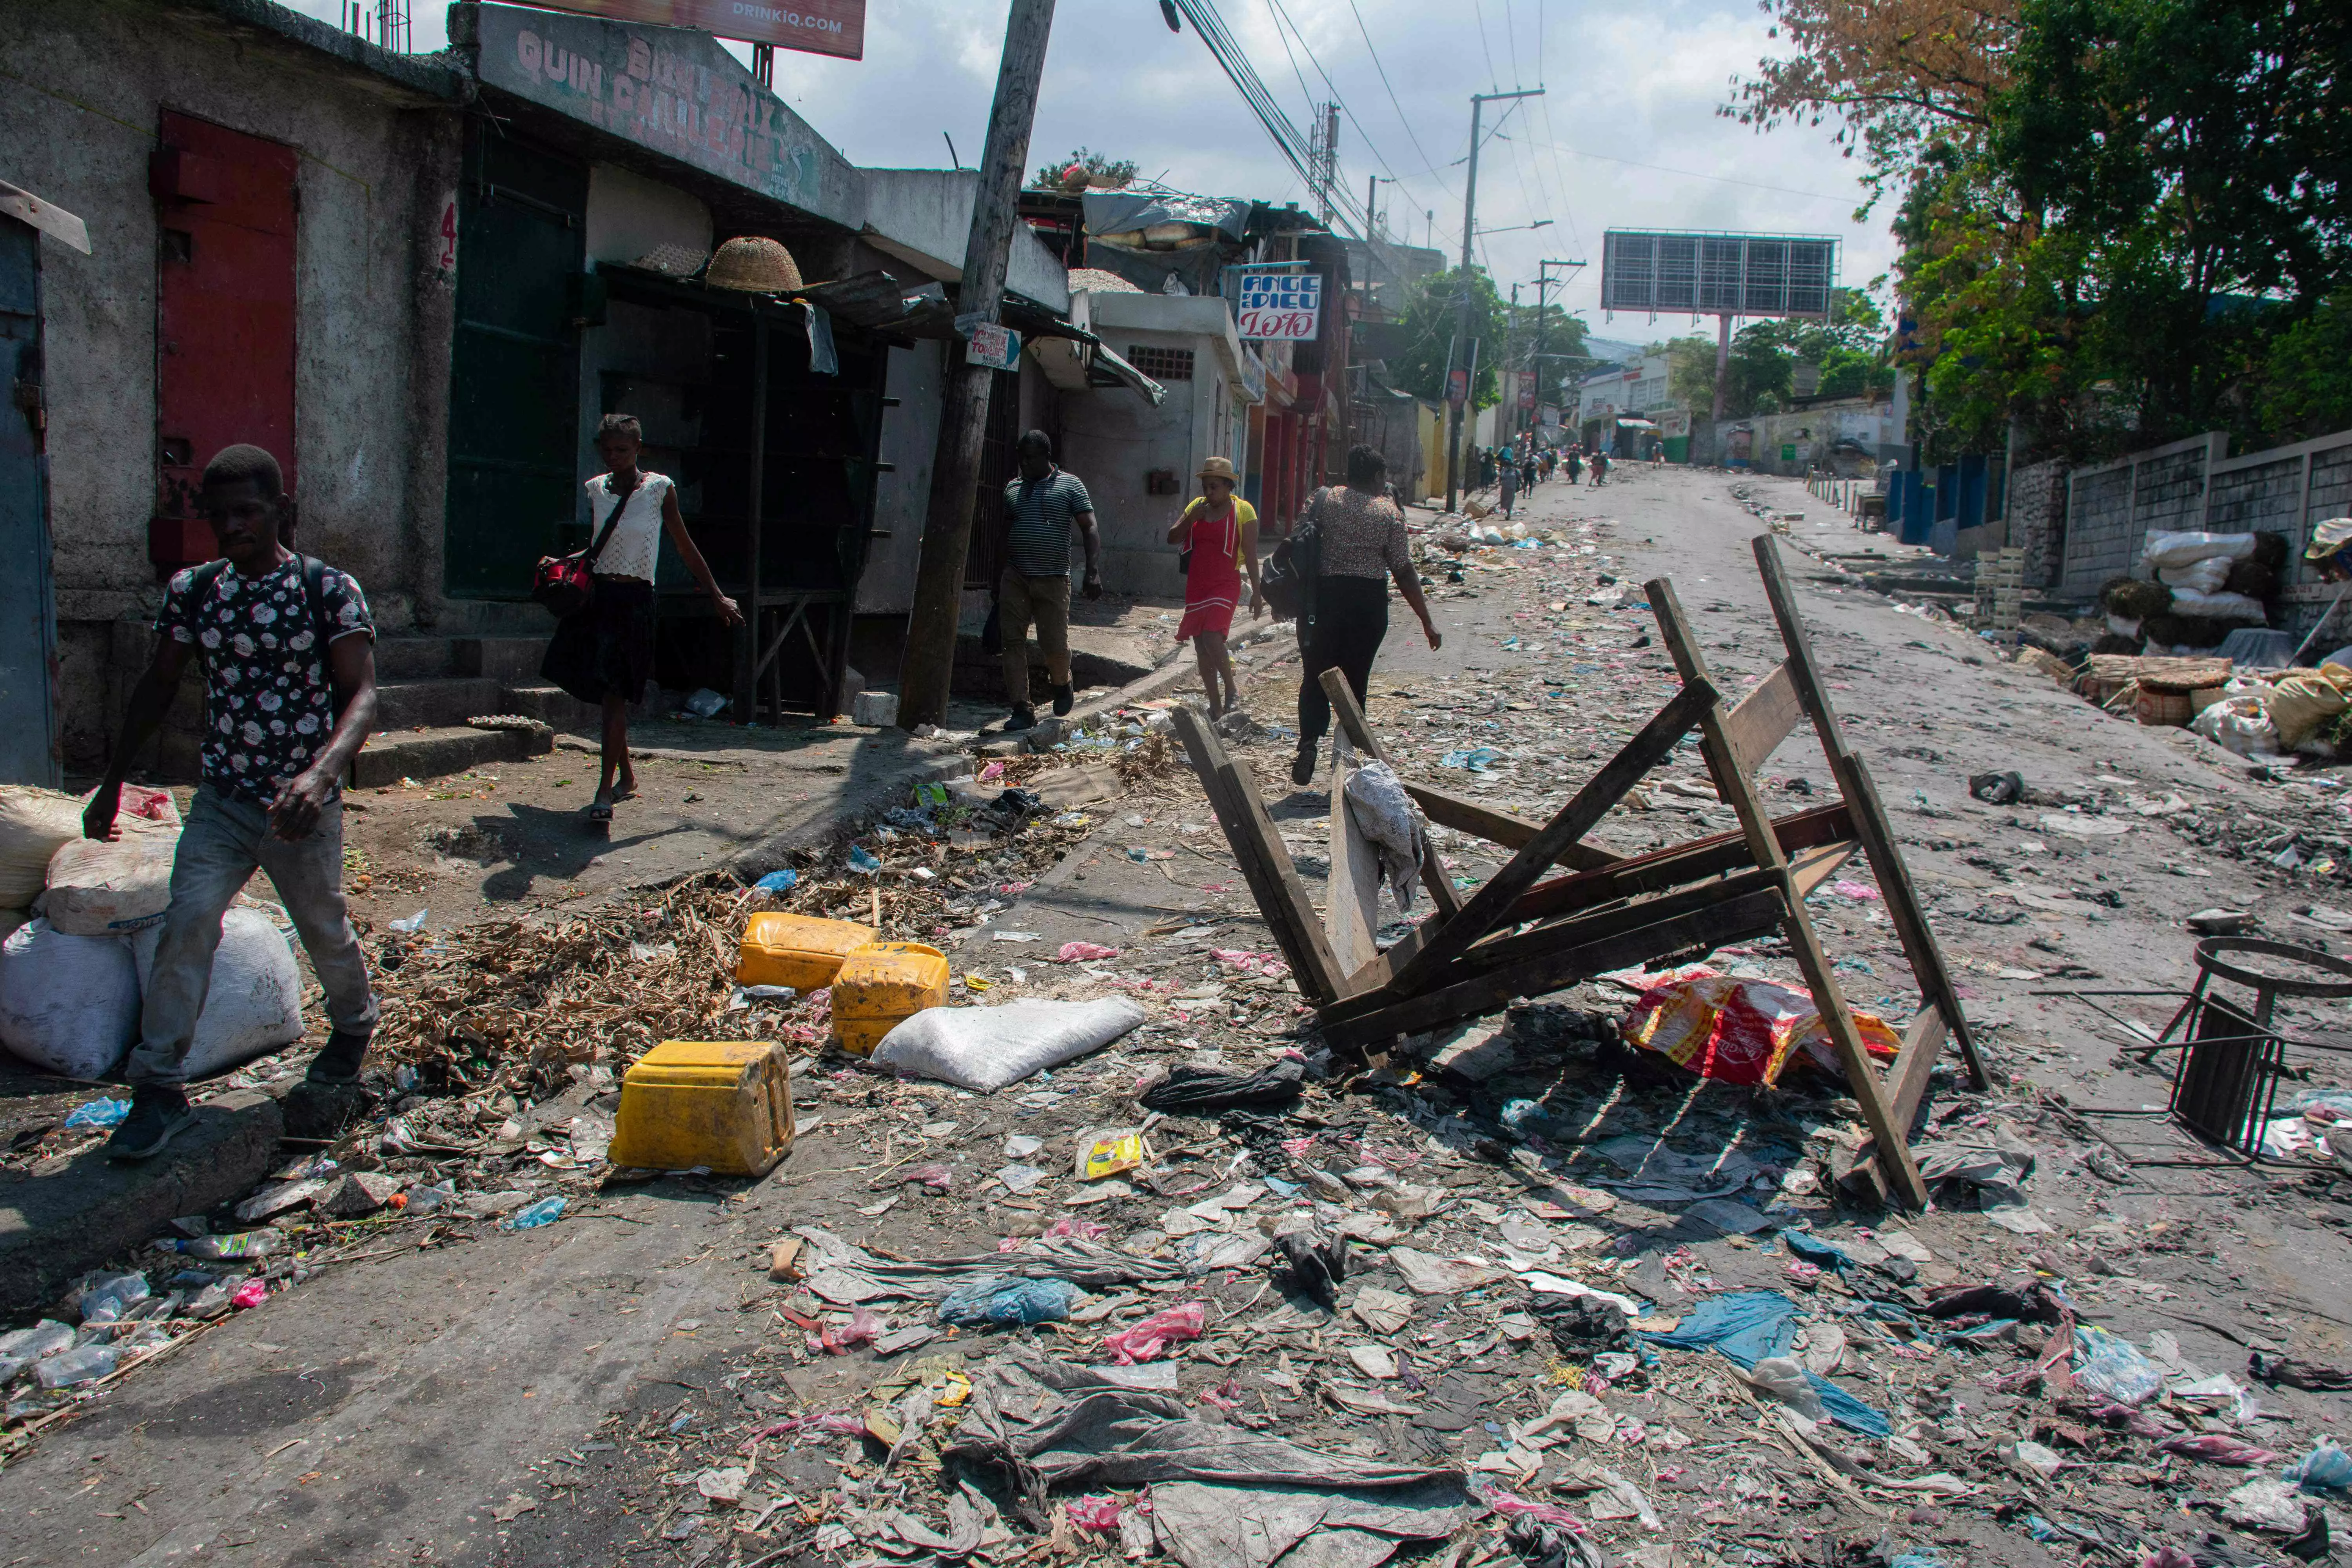 Farrukh Dhondy | Haiti is the face of total anarchy: Why West Indies did not federate